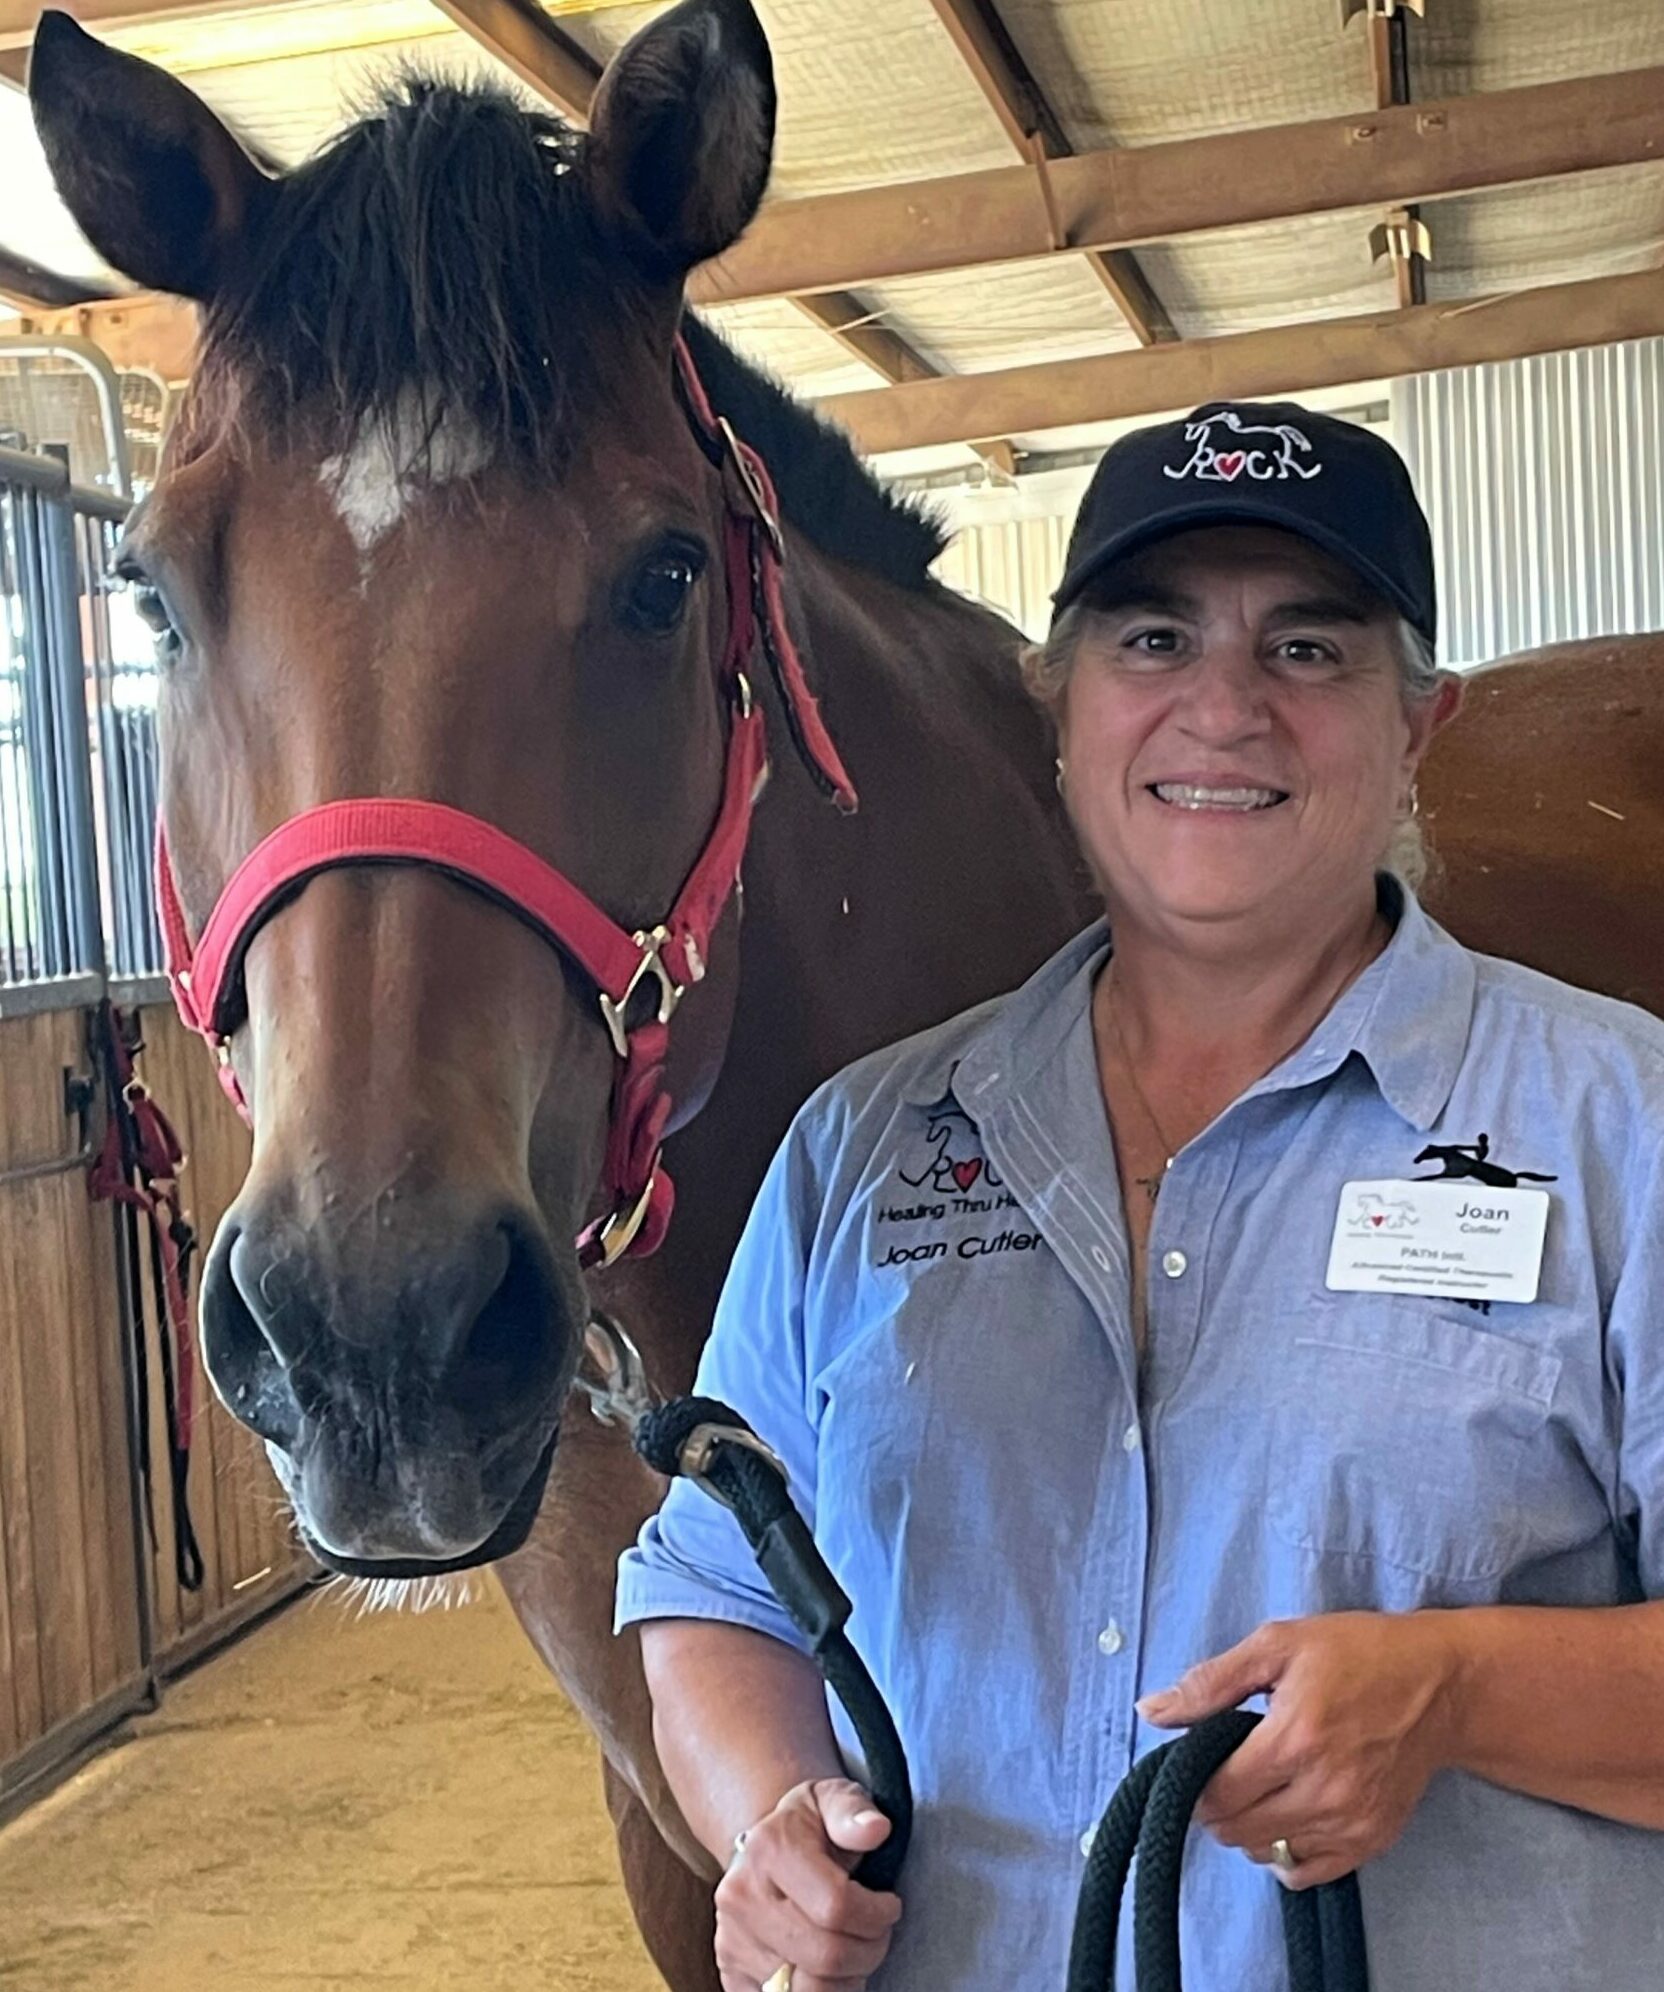 Joan Cutler, Program Manager, PATH Intl. Advanced Certified Therapeutic Riding Instructor